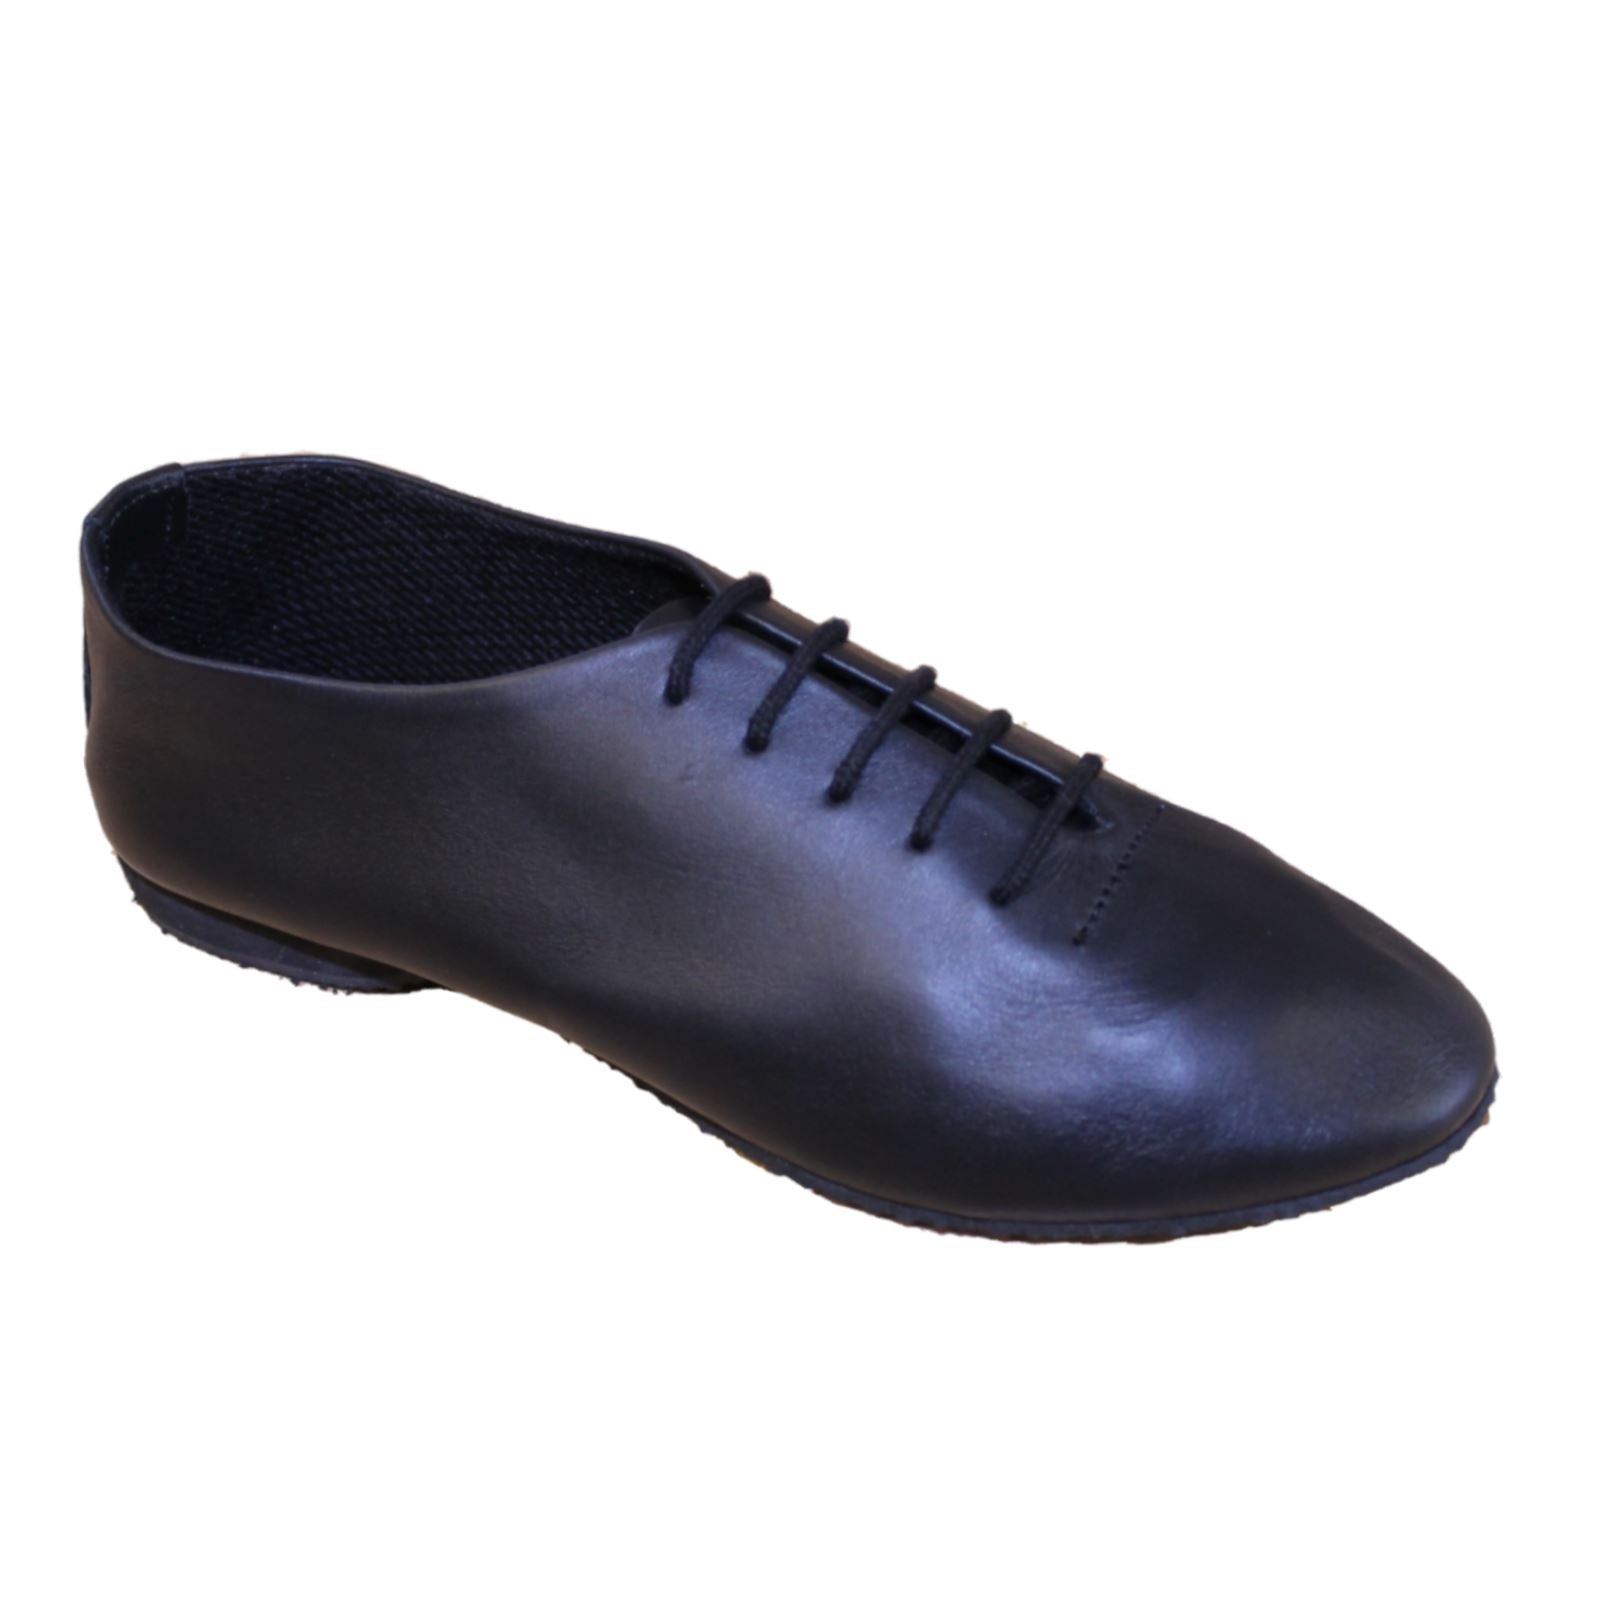 BLACK FULL RUBBER SOLE JAZZ SHOES 